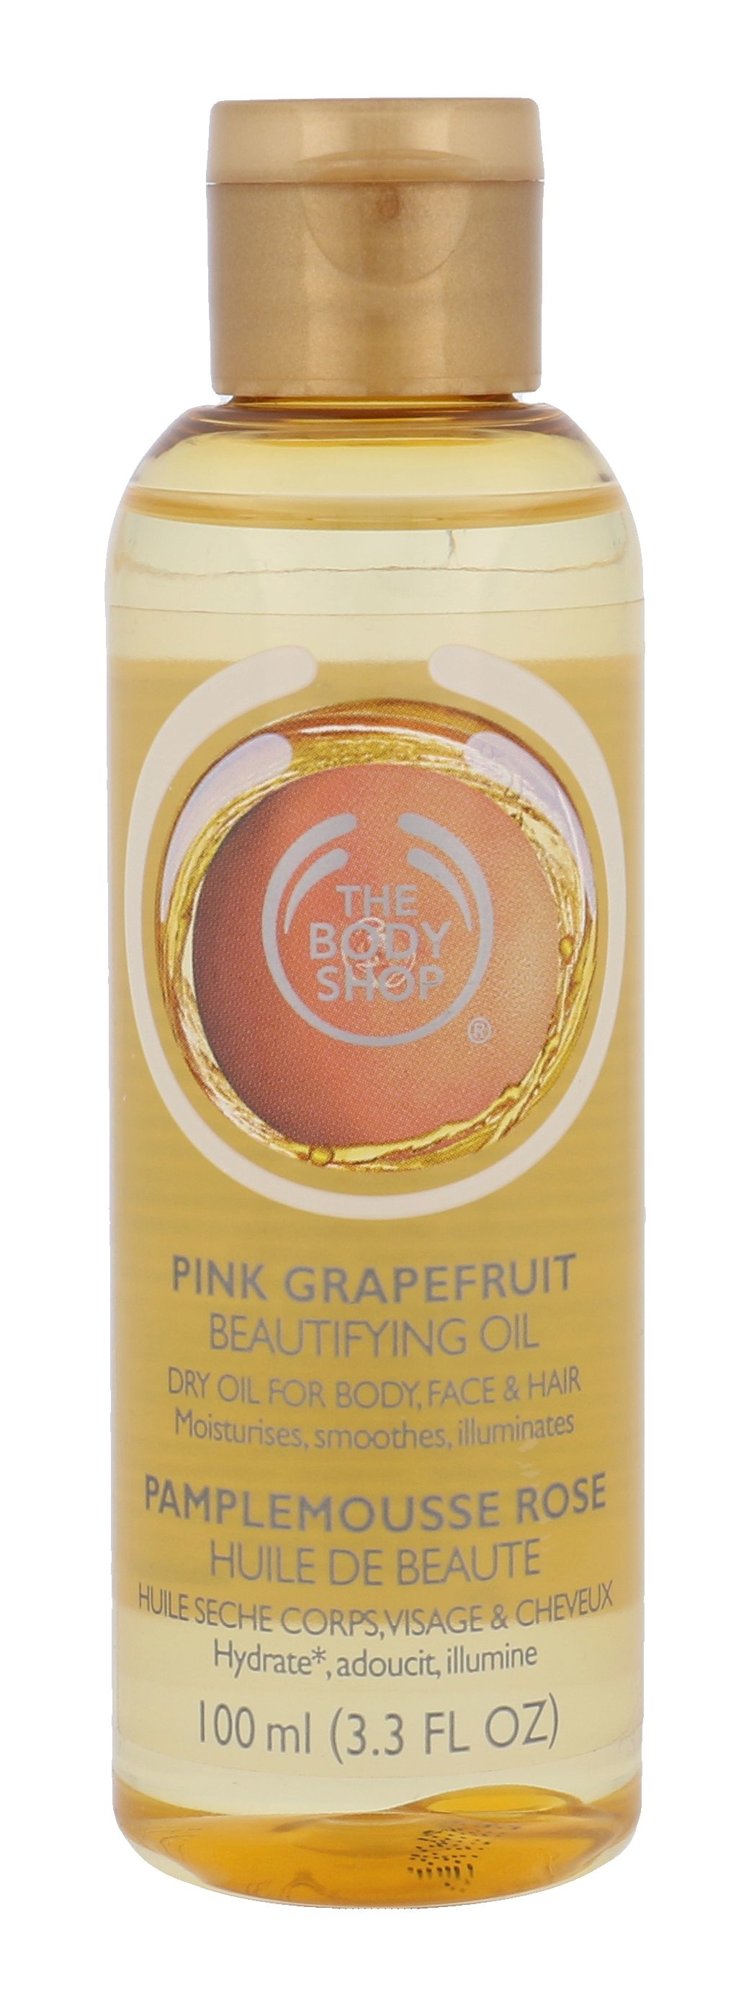 The Body Shop Pink Grapefruit Beautifying Oil